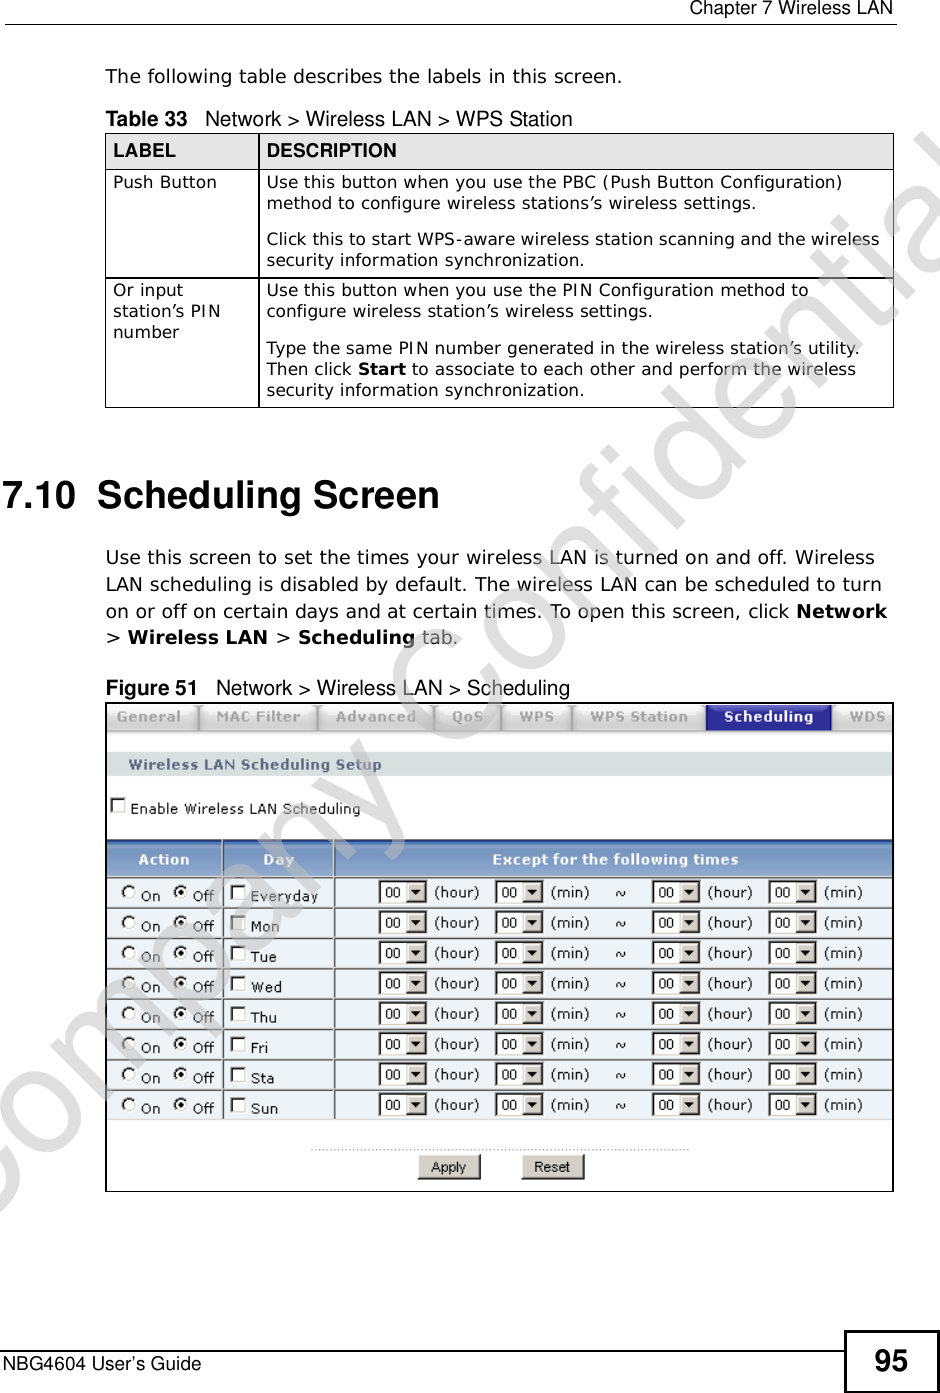  Chapter 7Wireless LANNBG4604 User’s Guide 95The following table describes the labels in this screen.7.10  Scheduling ScreenUse this screen to set the times your wireless LAN is turned on and off. Wireless LAN scheduling is disabled by default. The wireless LAN can be scheduled to turn on or off on certain days and at certain times. To open this screen, click Network&gt;Wireless LAN &gt; Scheduling tab.Figure 51   Network &gt; Wireless LAN &gt; SchedulingTable 33   Network &gt; Wireless LAN &gt; WPS StationLABEL DESCRIPTIONPush Button Use this button when you use the PBC (Push Button Configuration) method to configure wireless stations’s wireless settings.Click this to start WPS-aware wireless station scanning and the wireless security information synchronization. Or input station’s PIN numberUse this button when you use the PIN Configuration method to configure wireless station’s wireless settings.Type the same PIN number generated in the wireless station’s utility. Then click Start to associate to each other and perform the wireless security information synchronization. Company Confidential